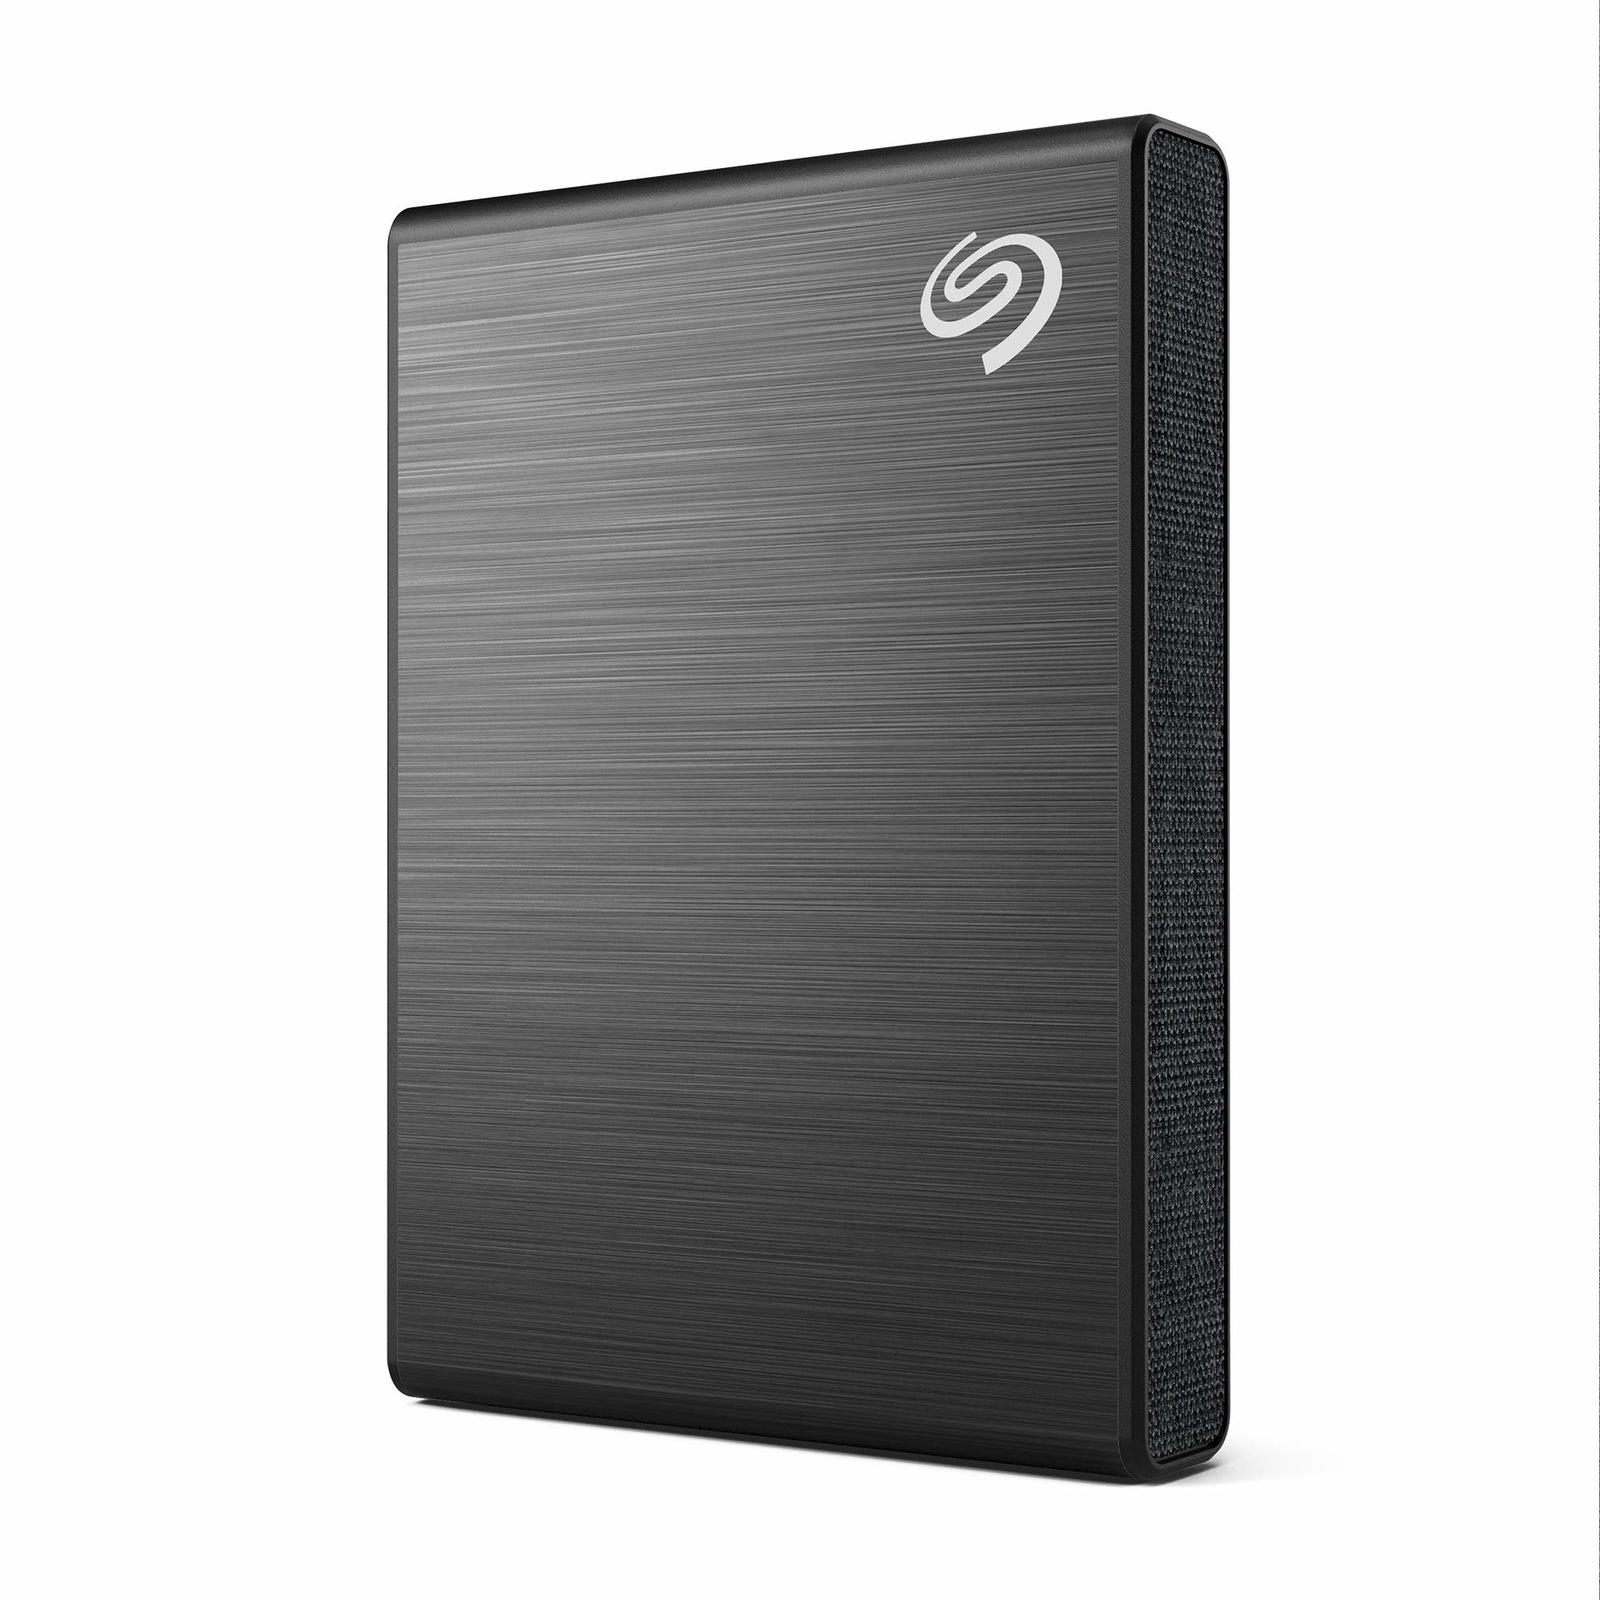 Seagate One Touch SSD 500GB External SSD Portable  Black, speeds up to 1030MB/s - $98.21 - $231.15